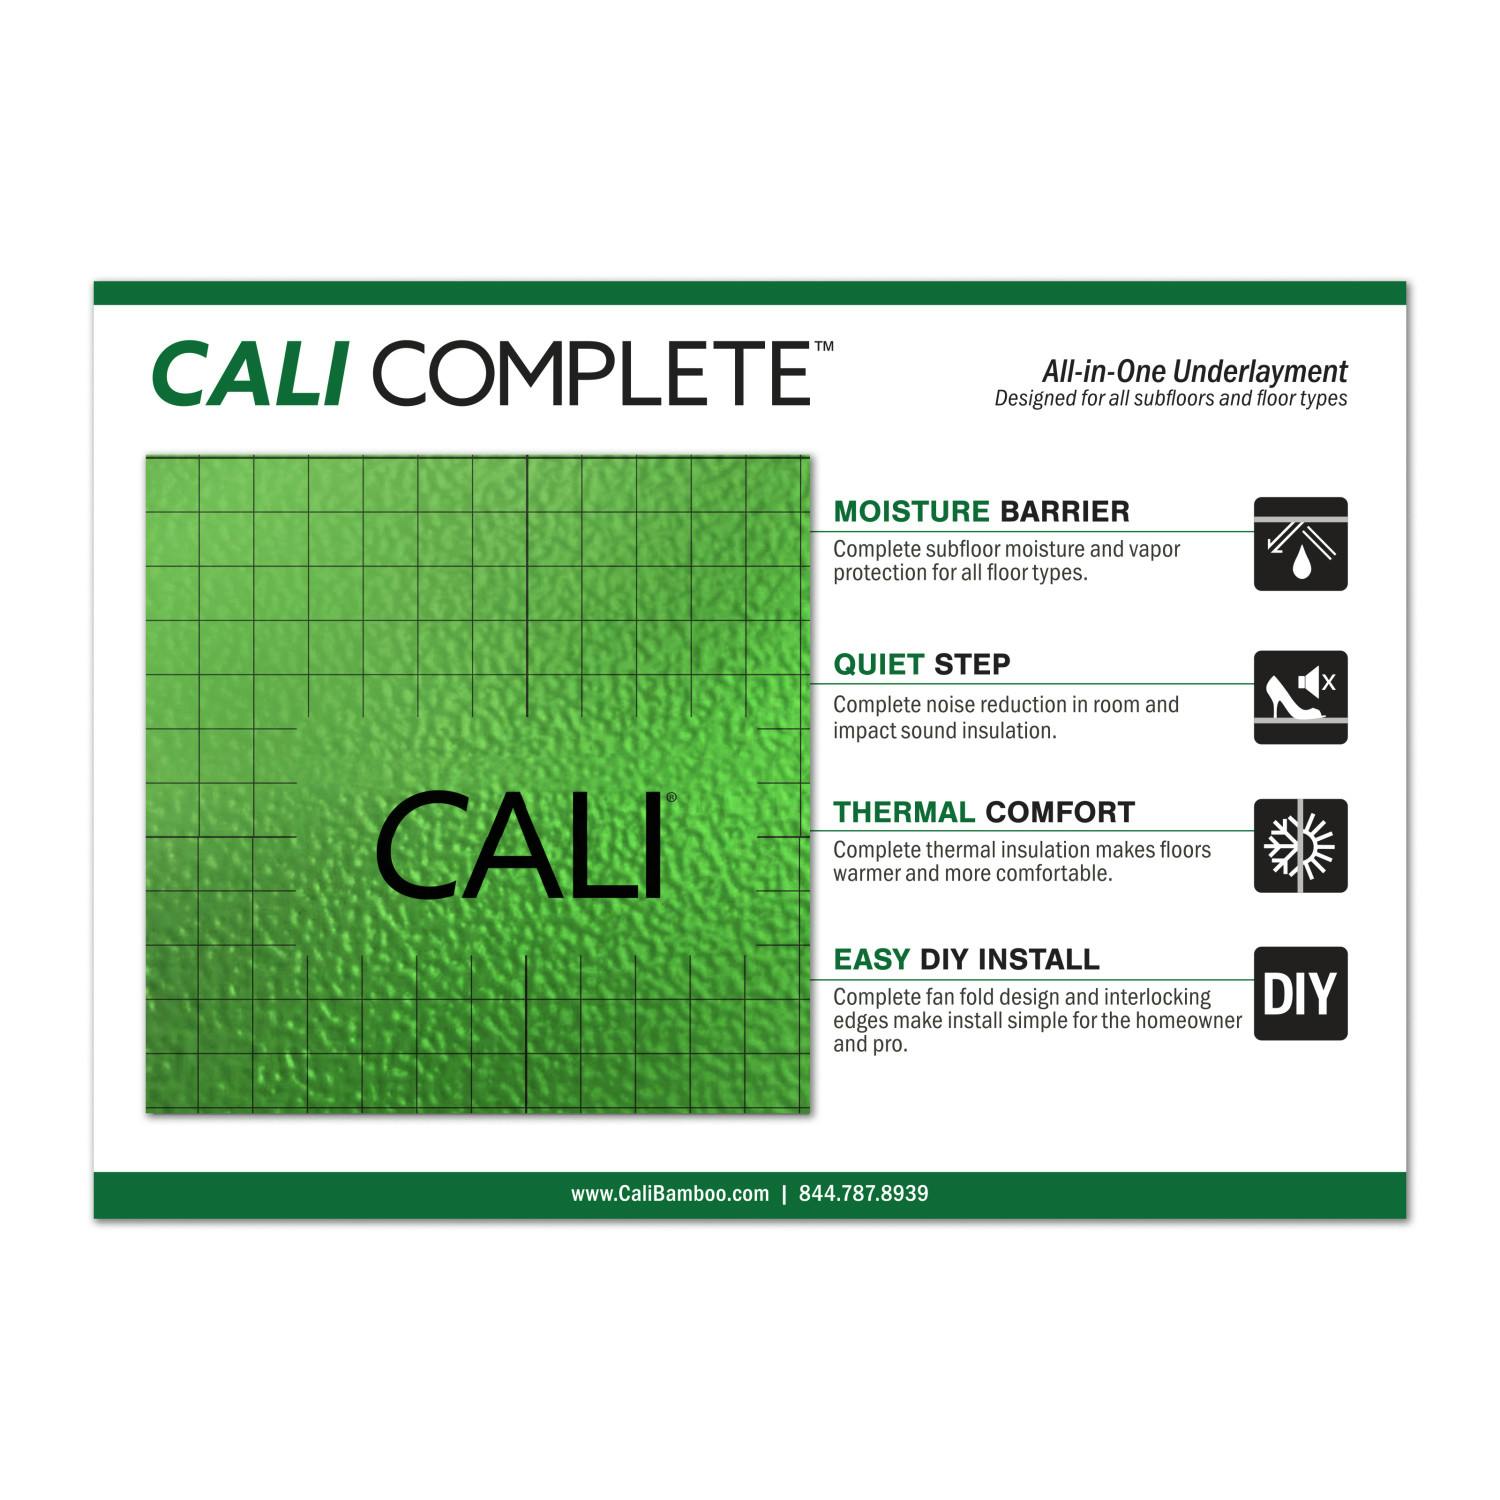 SAMPLE- Cali Complete™ Underlayment 1.5mm thickness- Postcard style